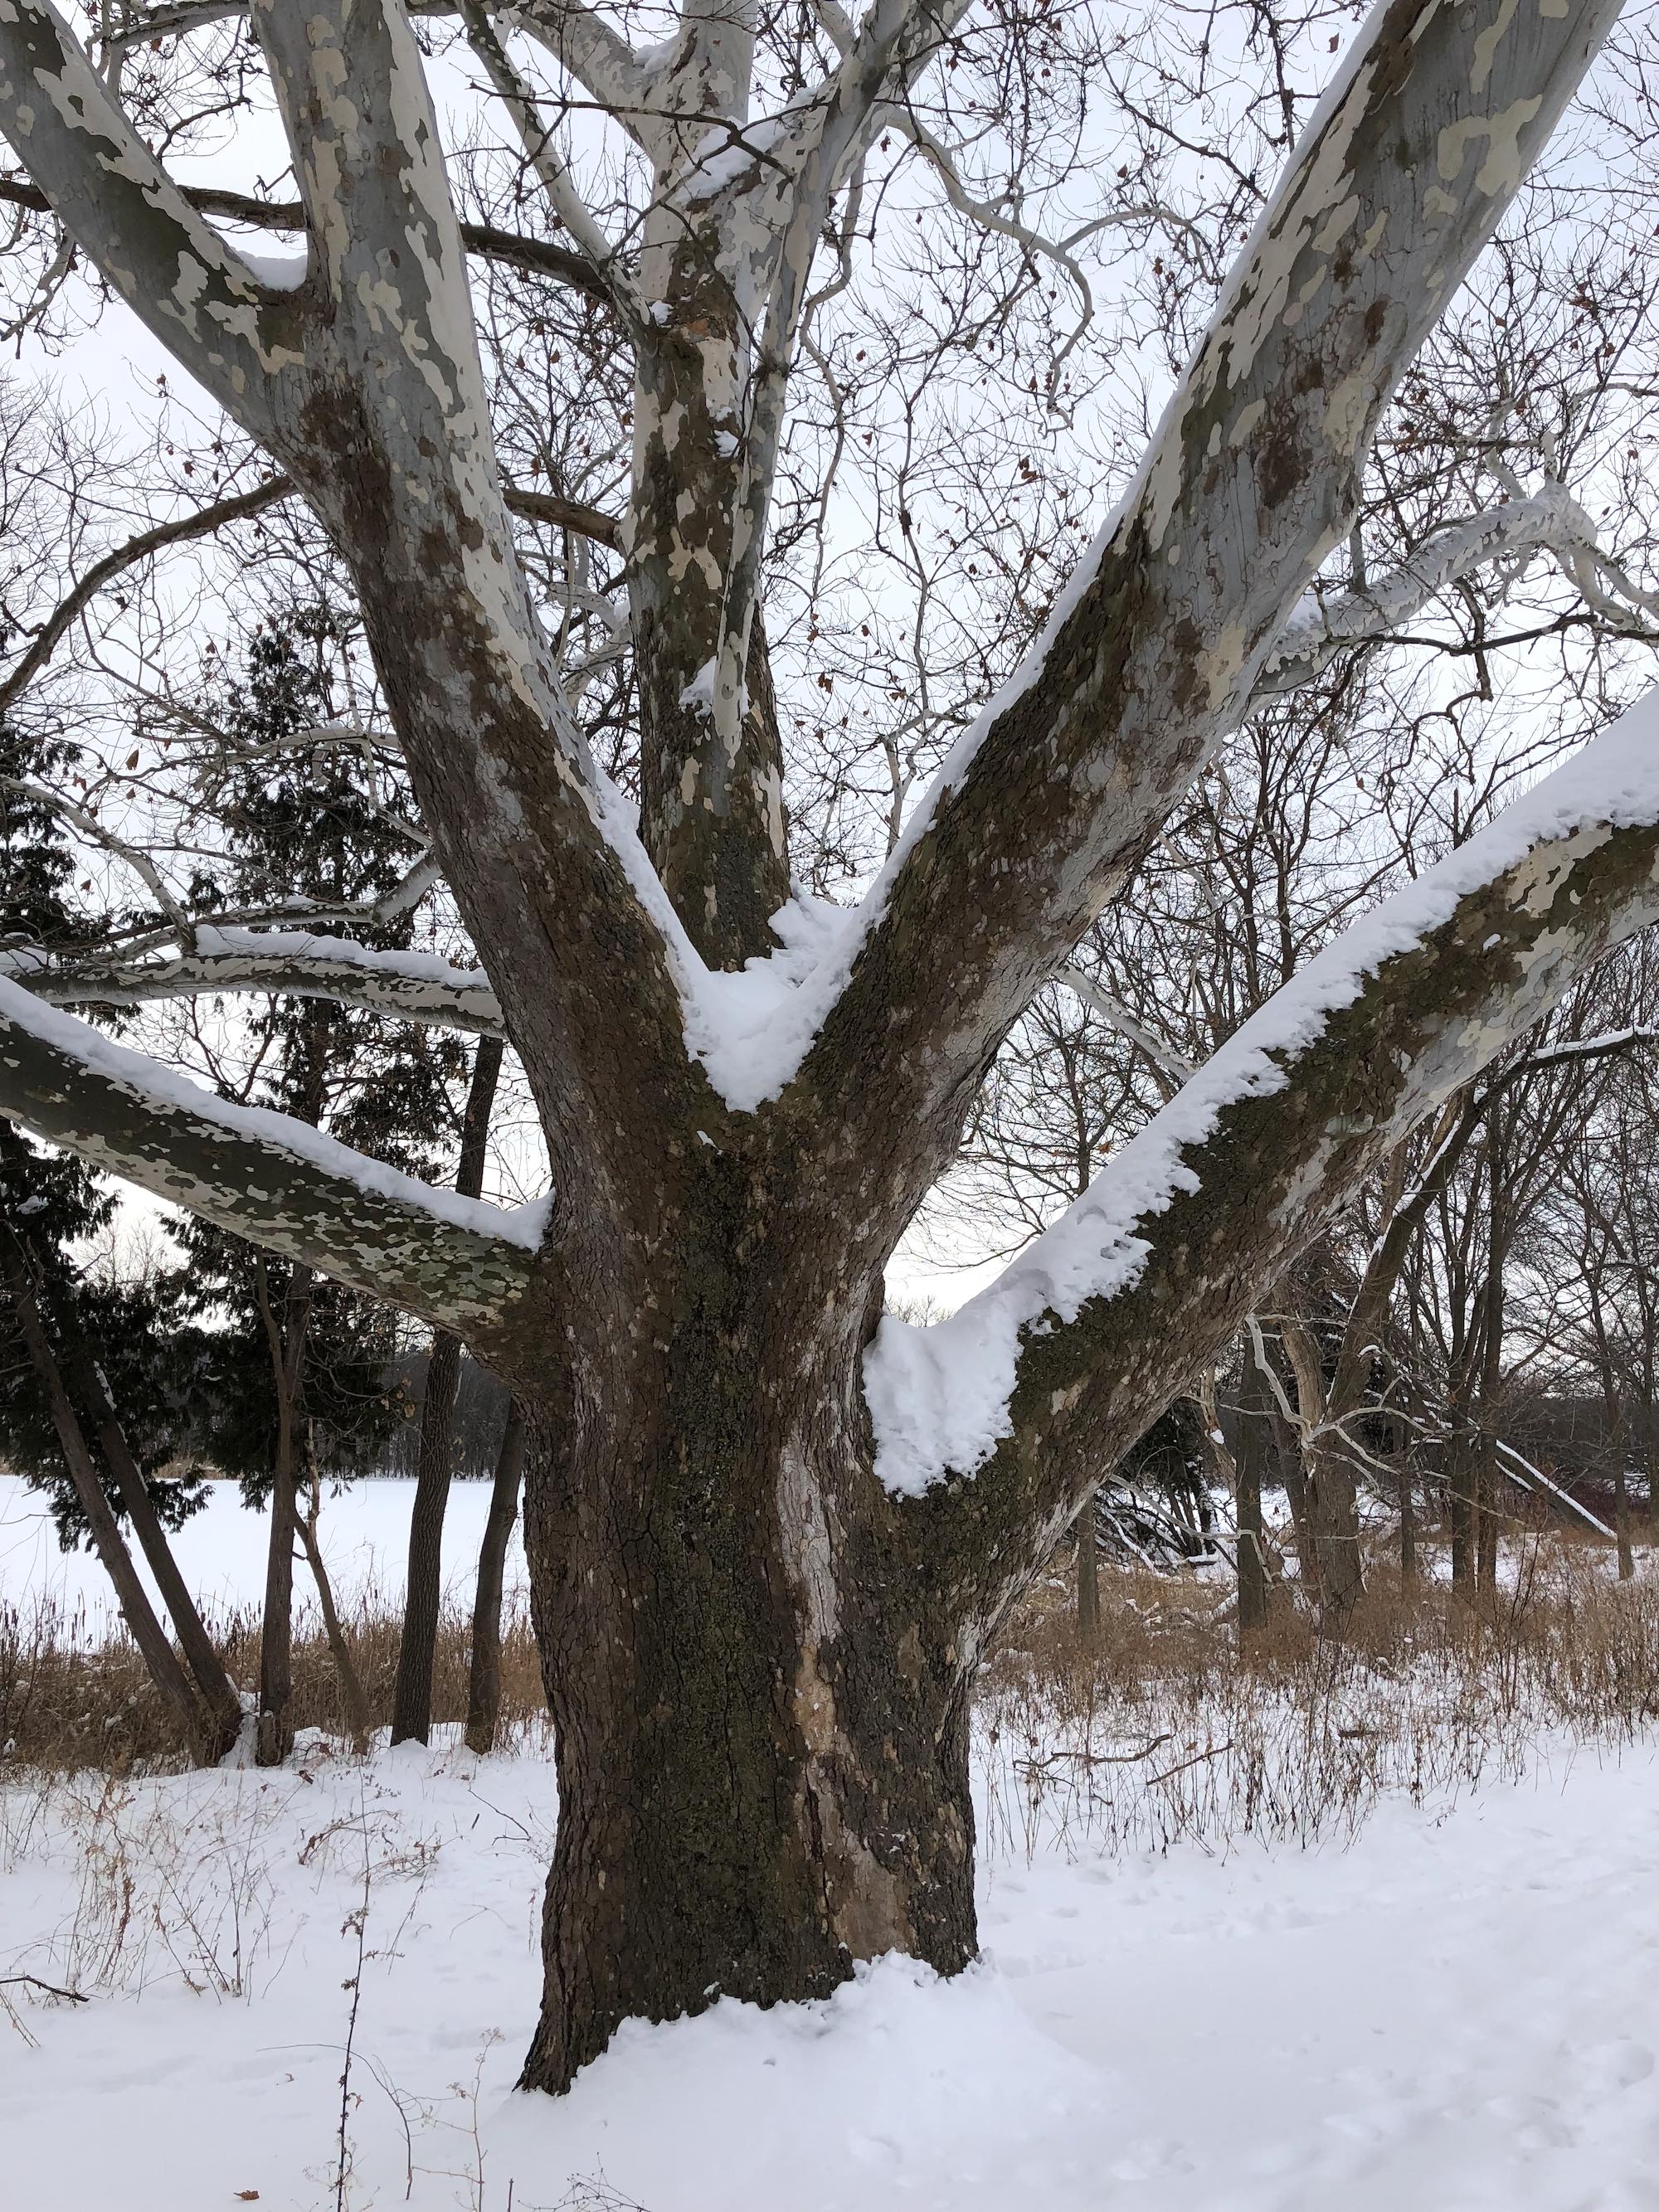 Sycamore tree between Ho-Nee-Um Pond and Arbor Drive on north shore of Lake Wingra on February 10, 2018.